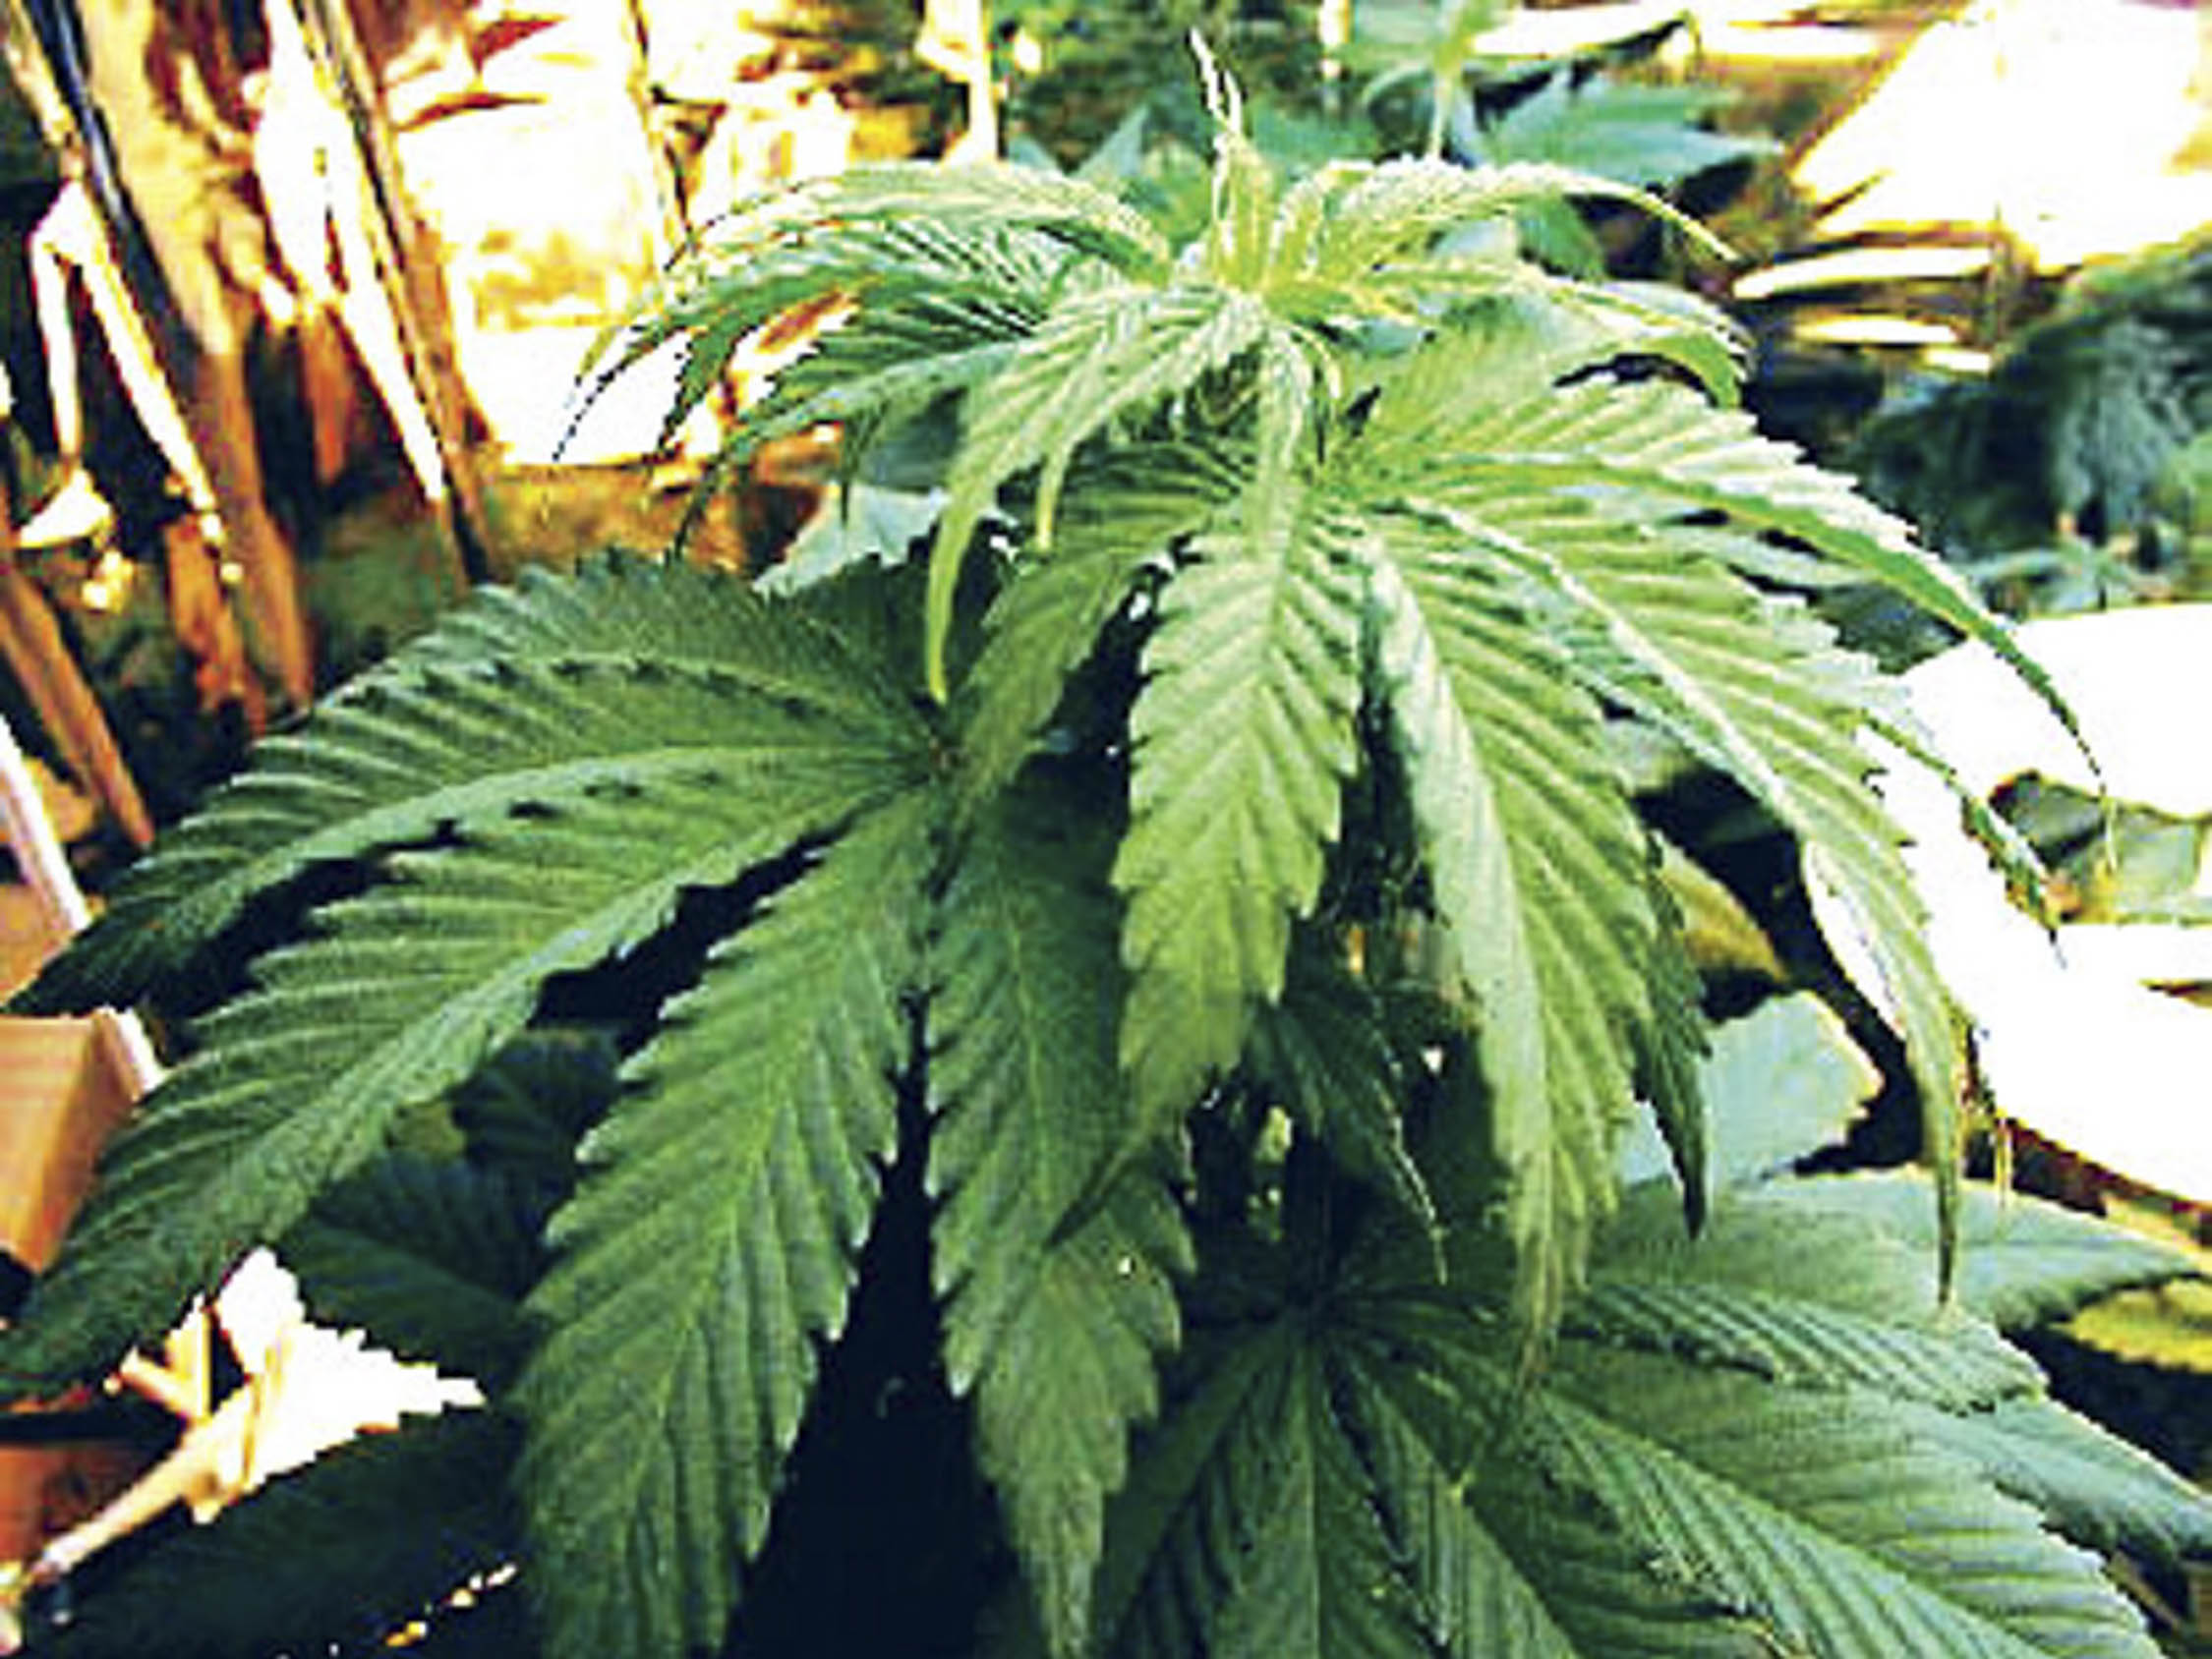 THE GOAL is to someday come up with a protocol for the therapeutic use of cannabis oil, an extract of the cannabis plant. PHOTO: INQUIRER